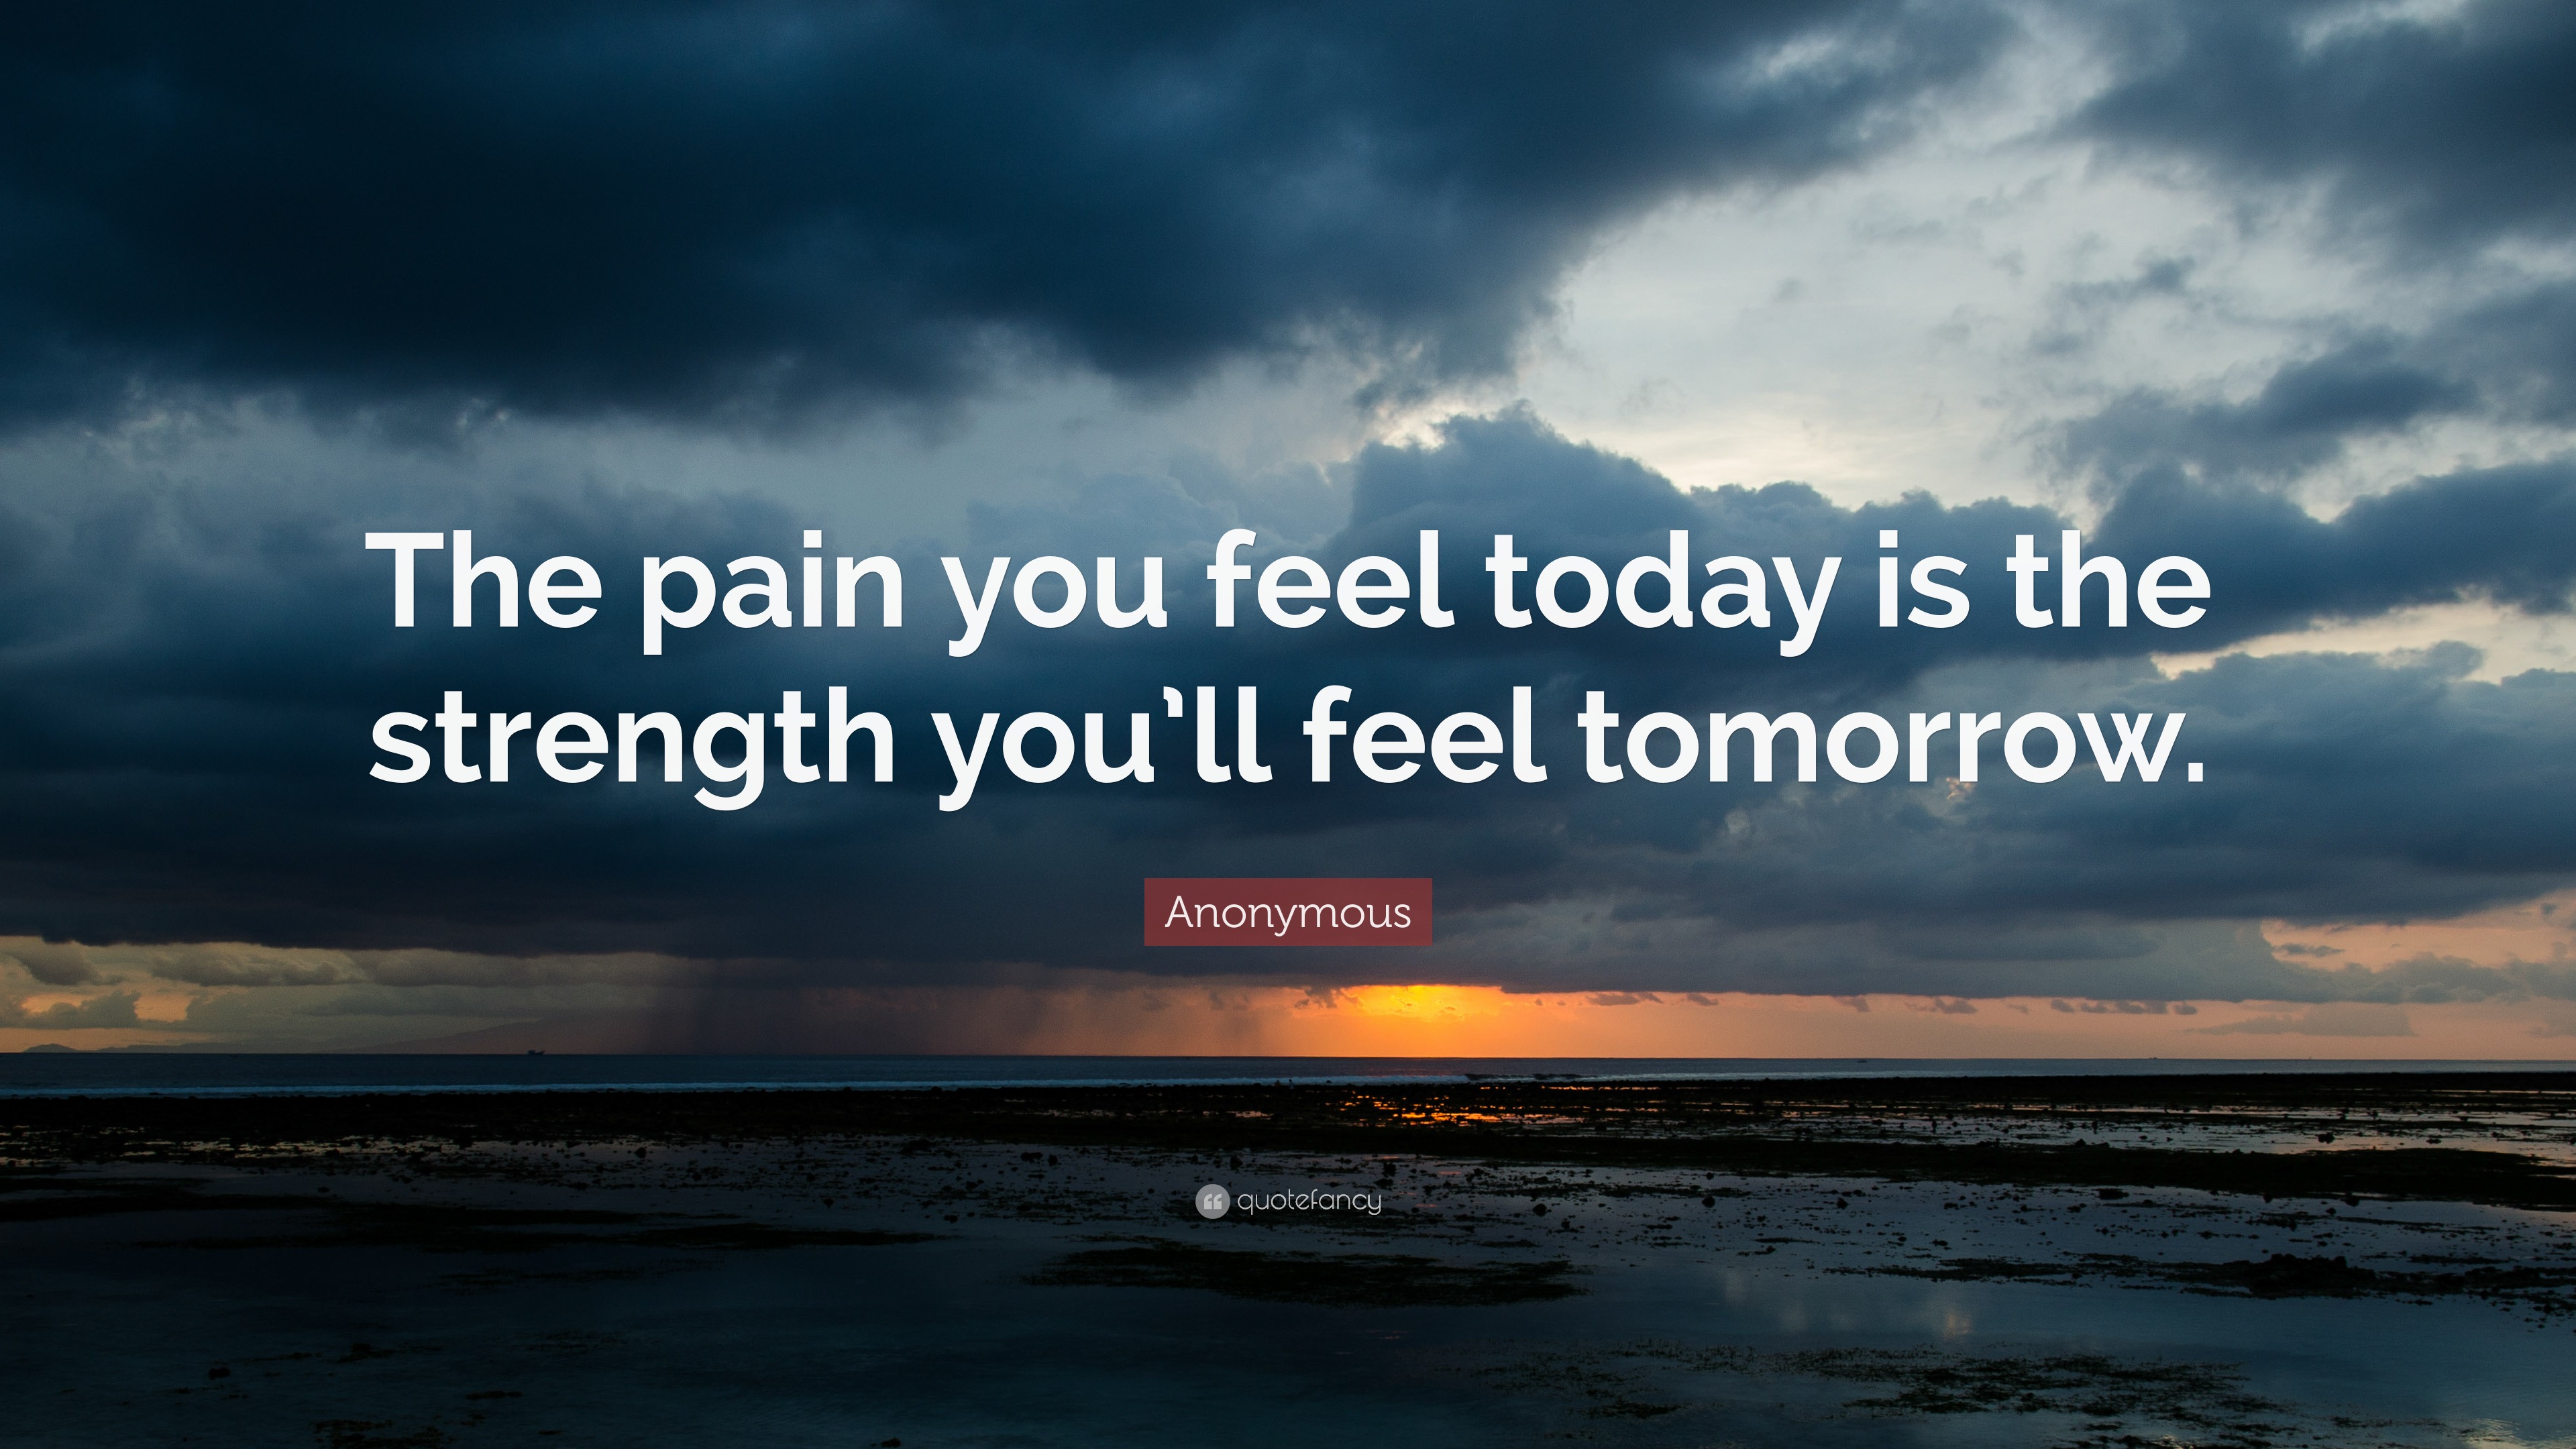 Anonymous Quote: “The pain you feel today is the strength you’ll feel